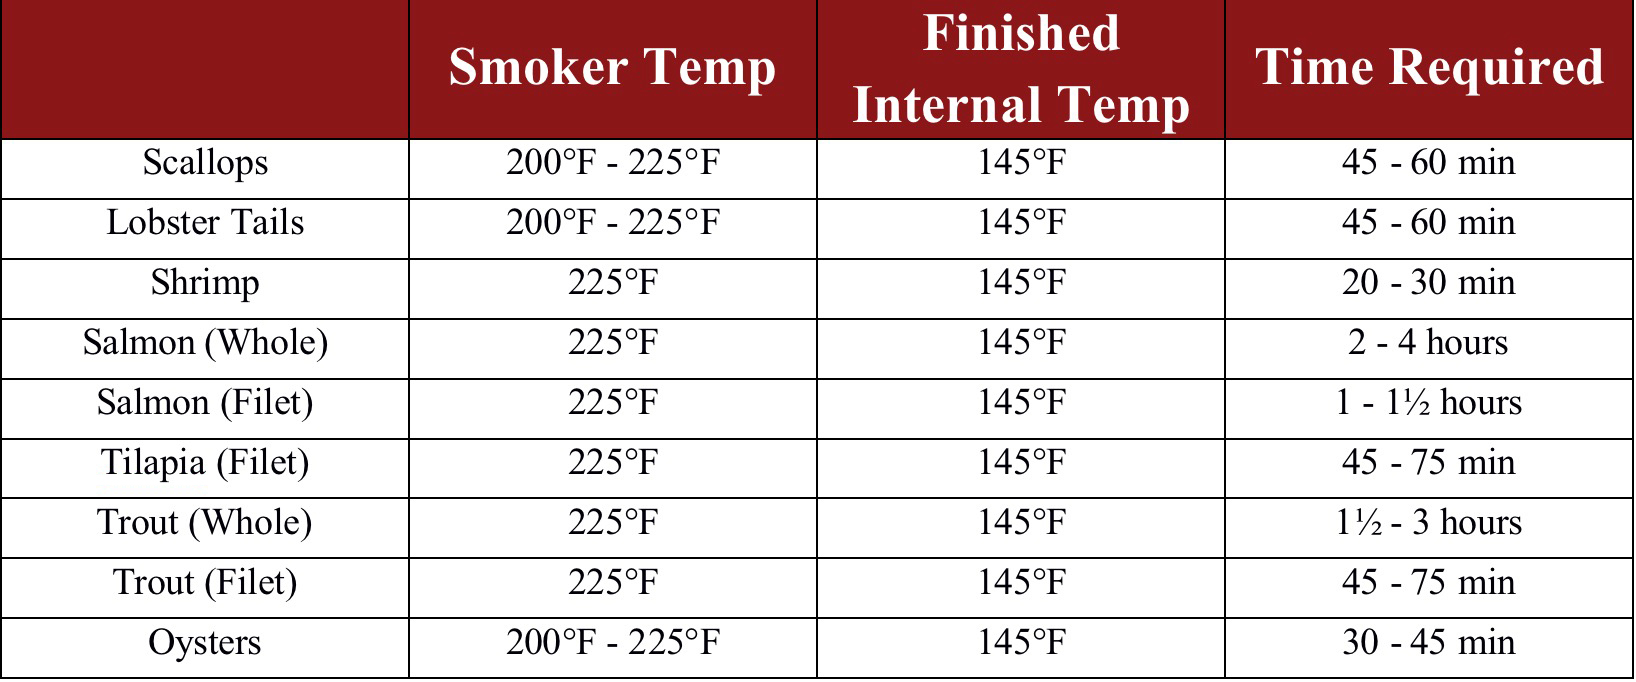 Fish and Seafood Smoking Times and Temperatures